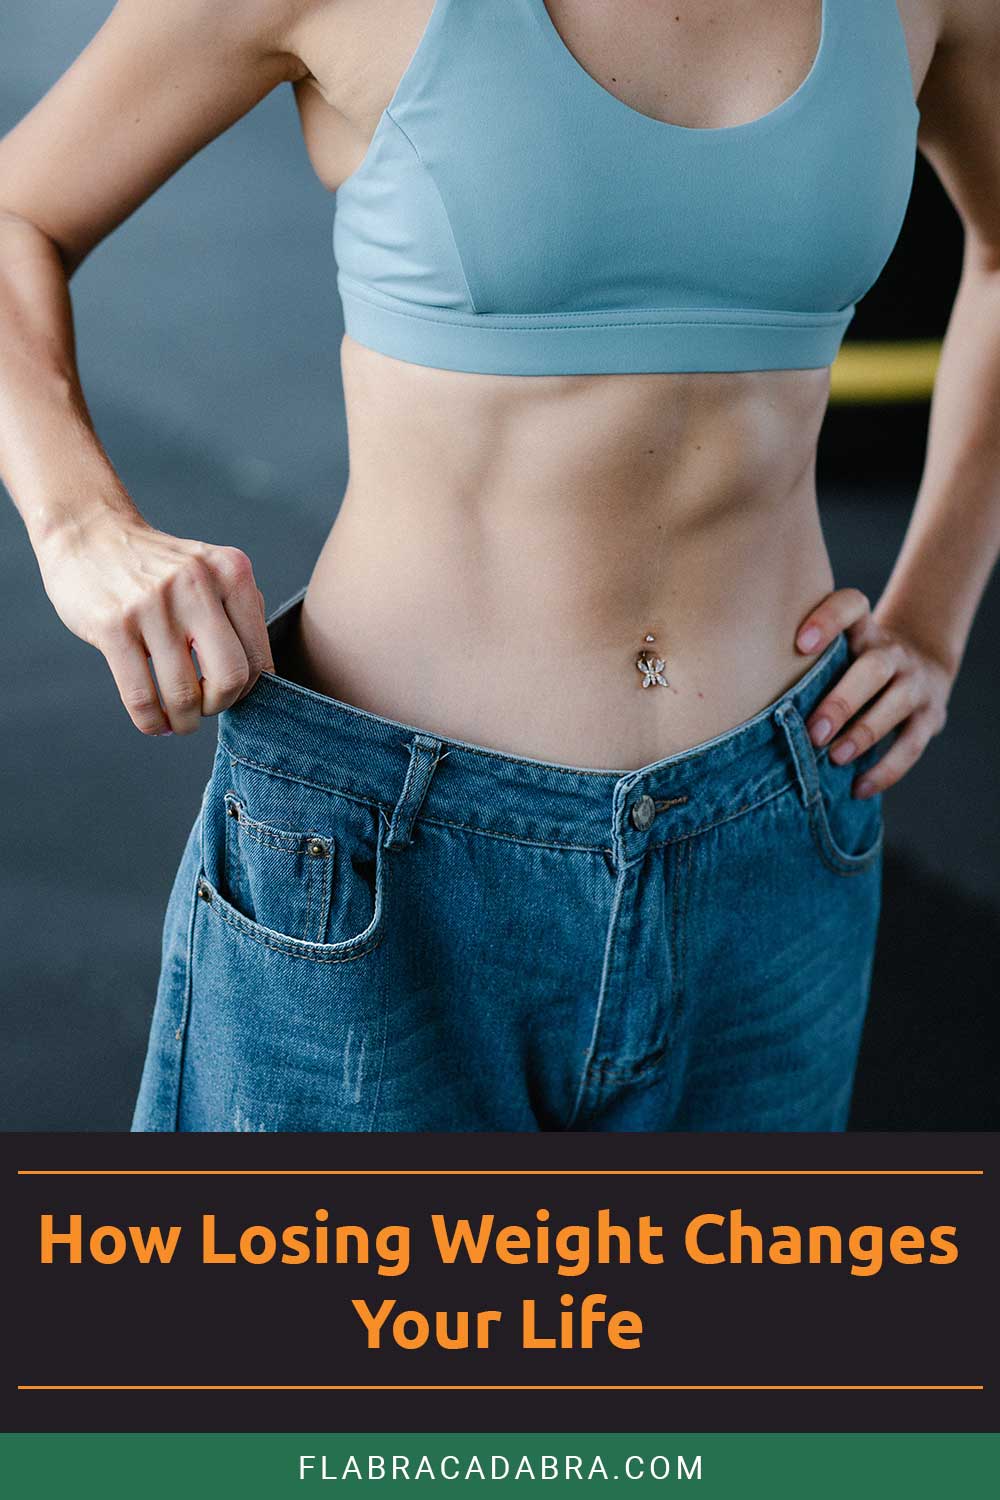 Woman stretching her jeans pant's waist - Losing Weight Changes Your Life.